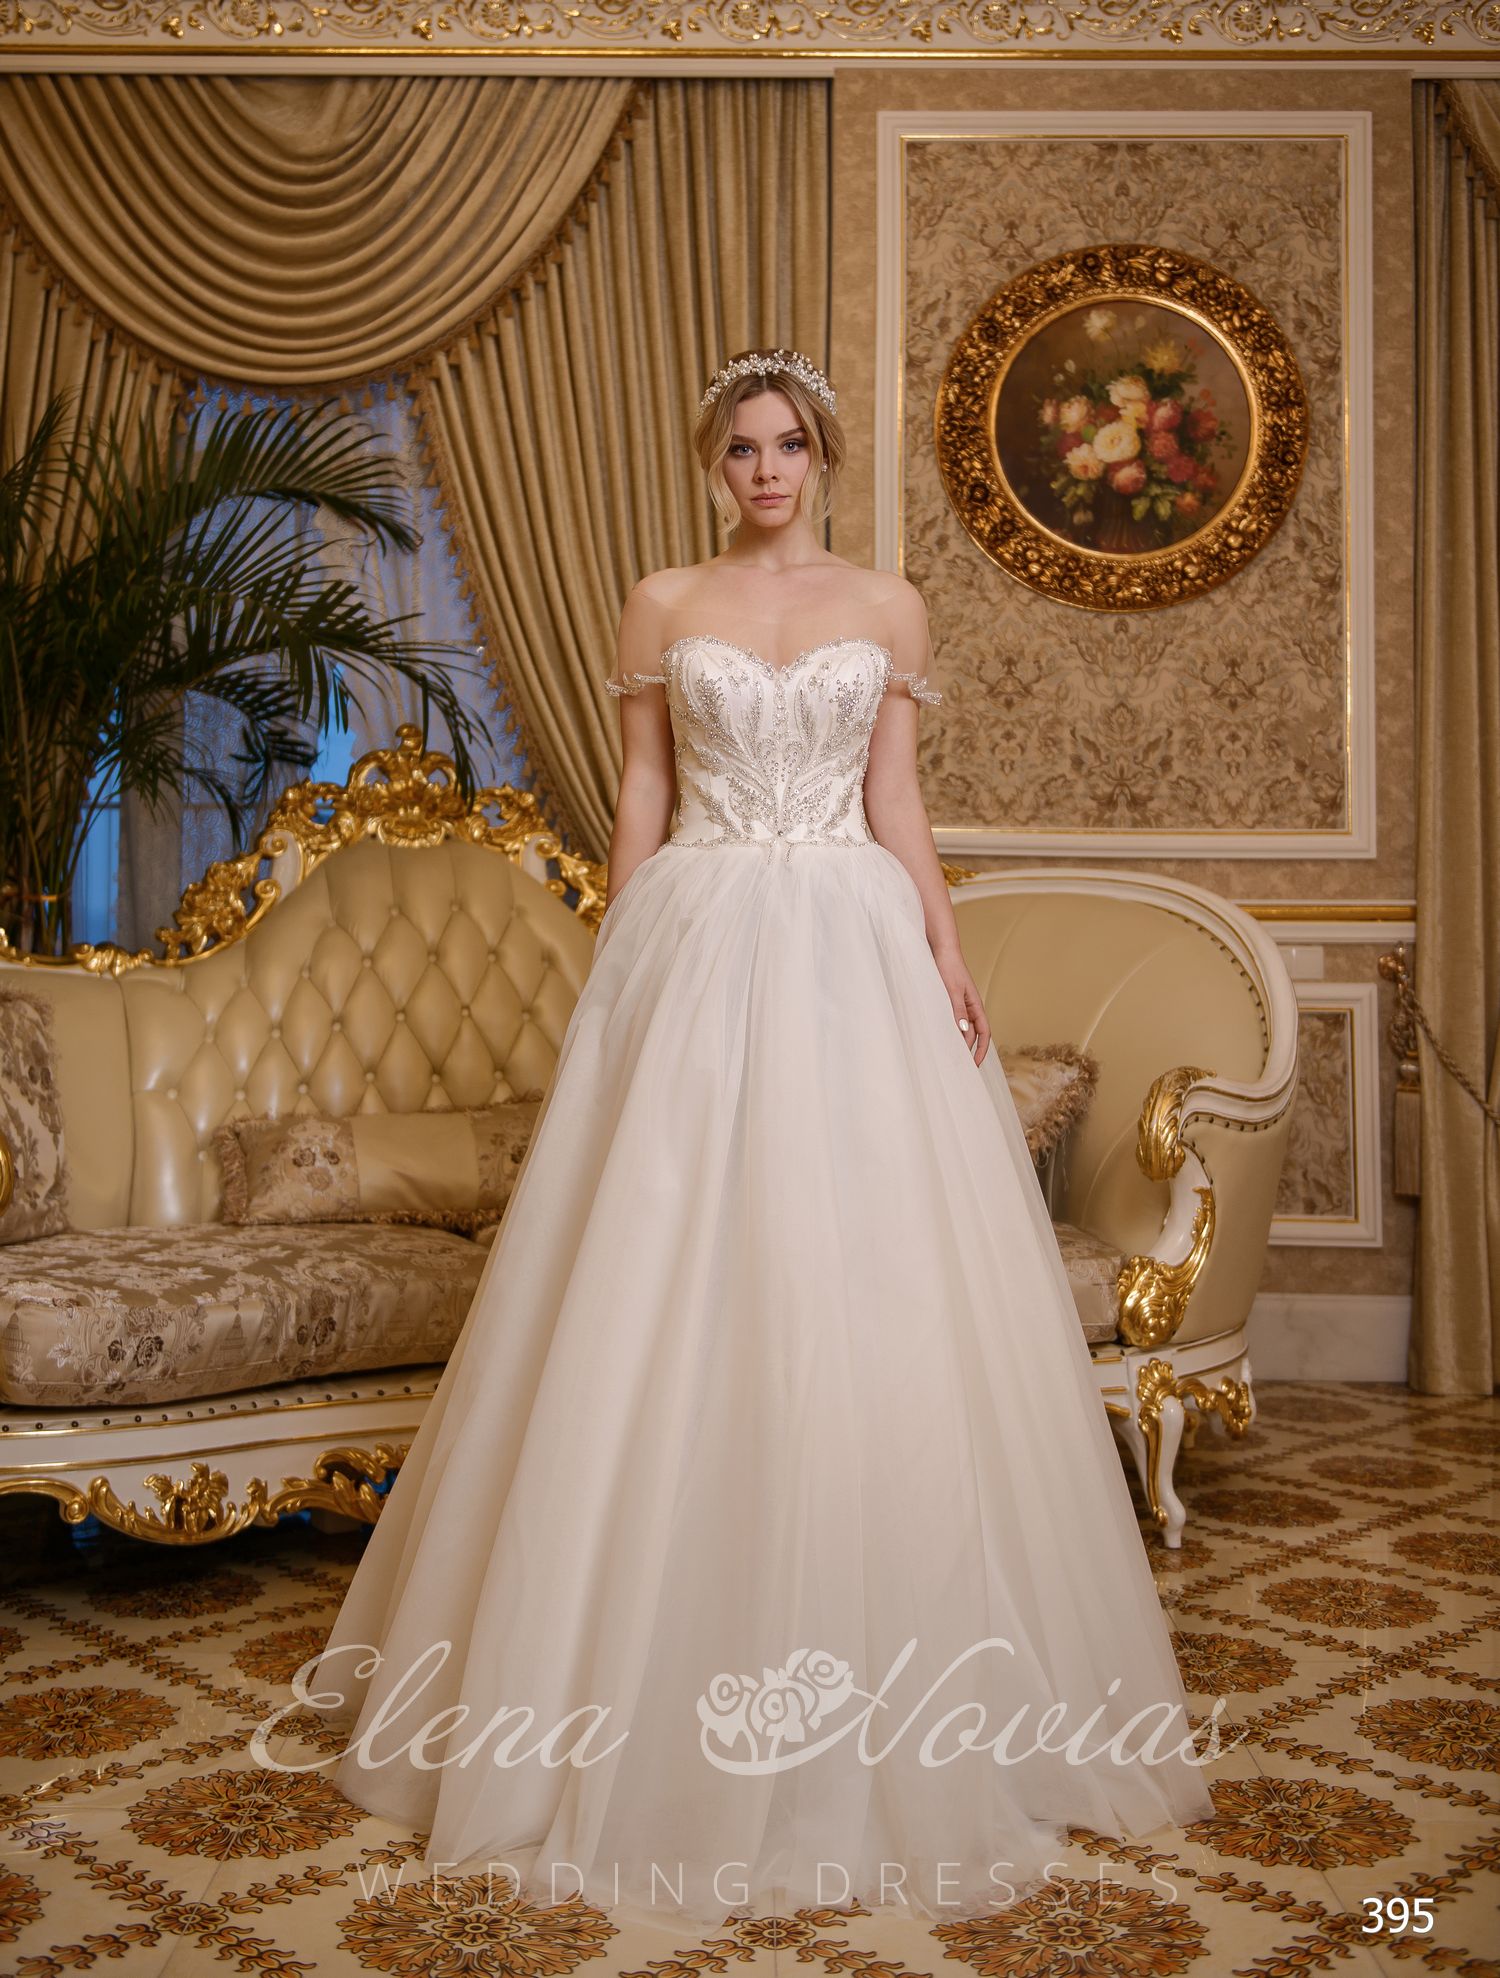 Wedding dress-bustier with sleeves-wings from " ElenaNovias»